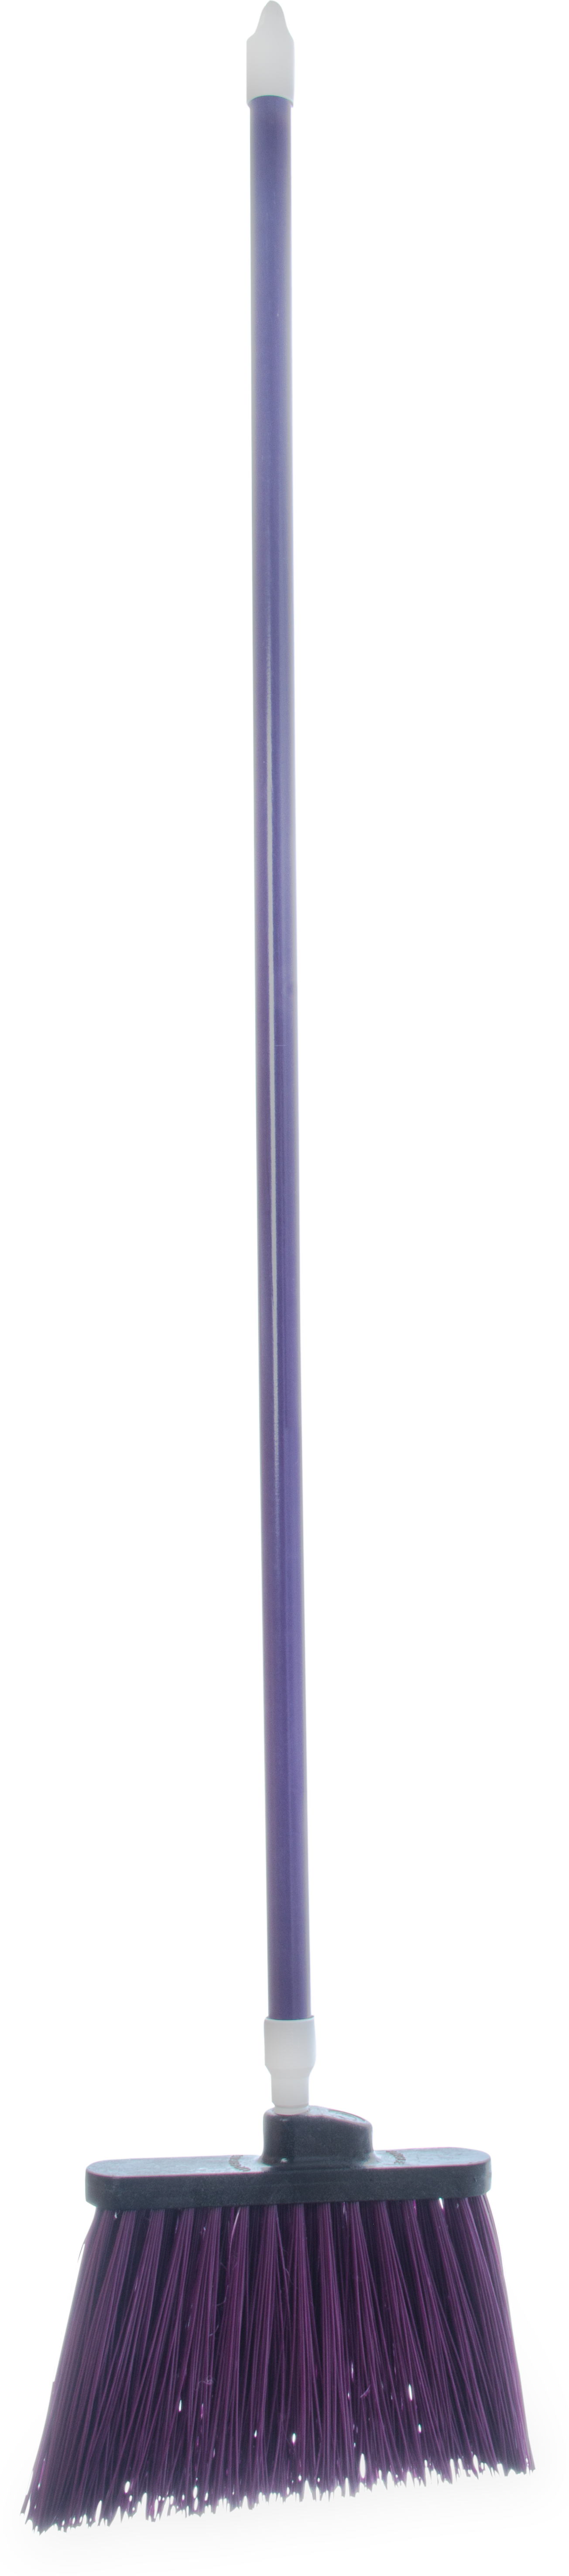 Sparta Spectrum Duo-Sweep Angle Broom Unflagged 56 Long - Purple